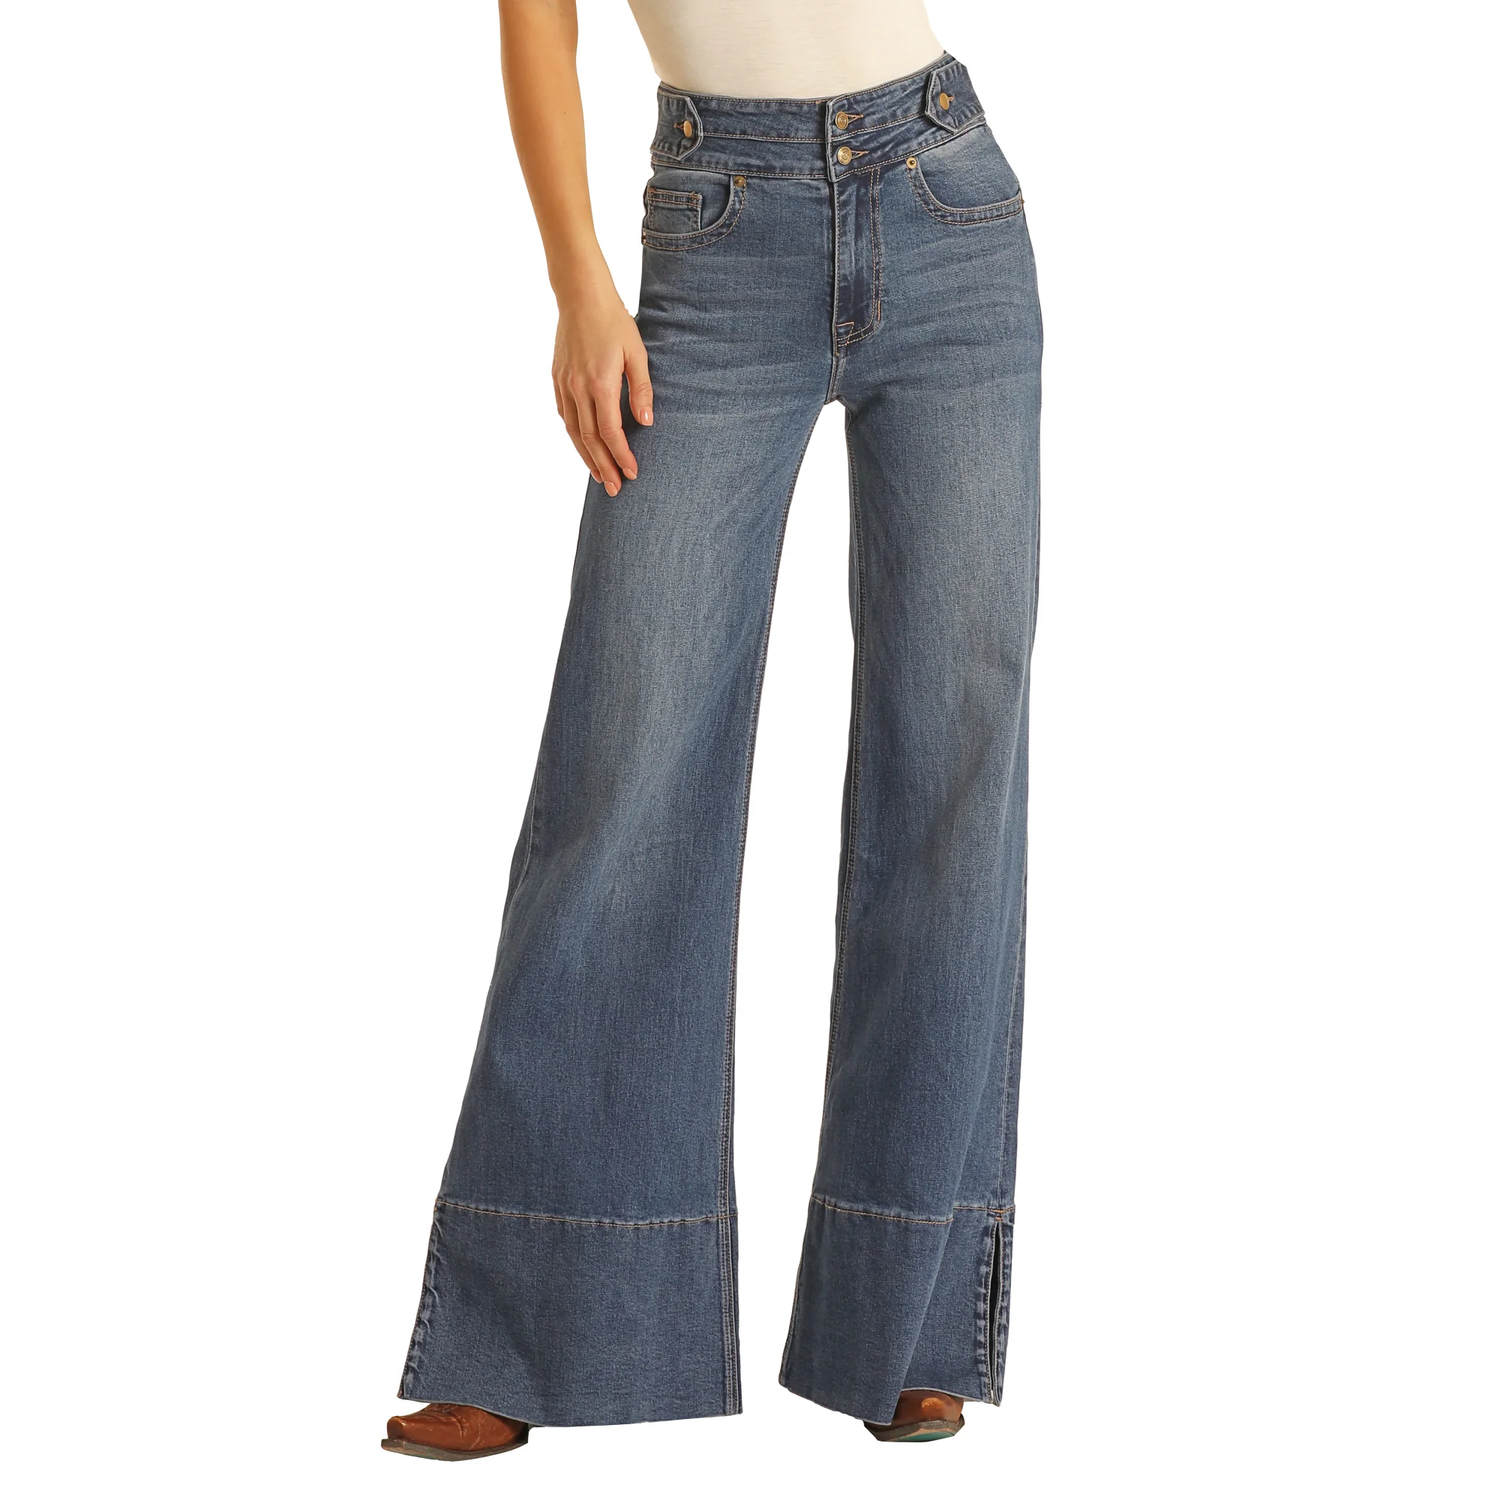 Rock & Roll Denim Ladies Palazzo Flare Leg Jeans - Western Style Perfection